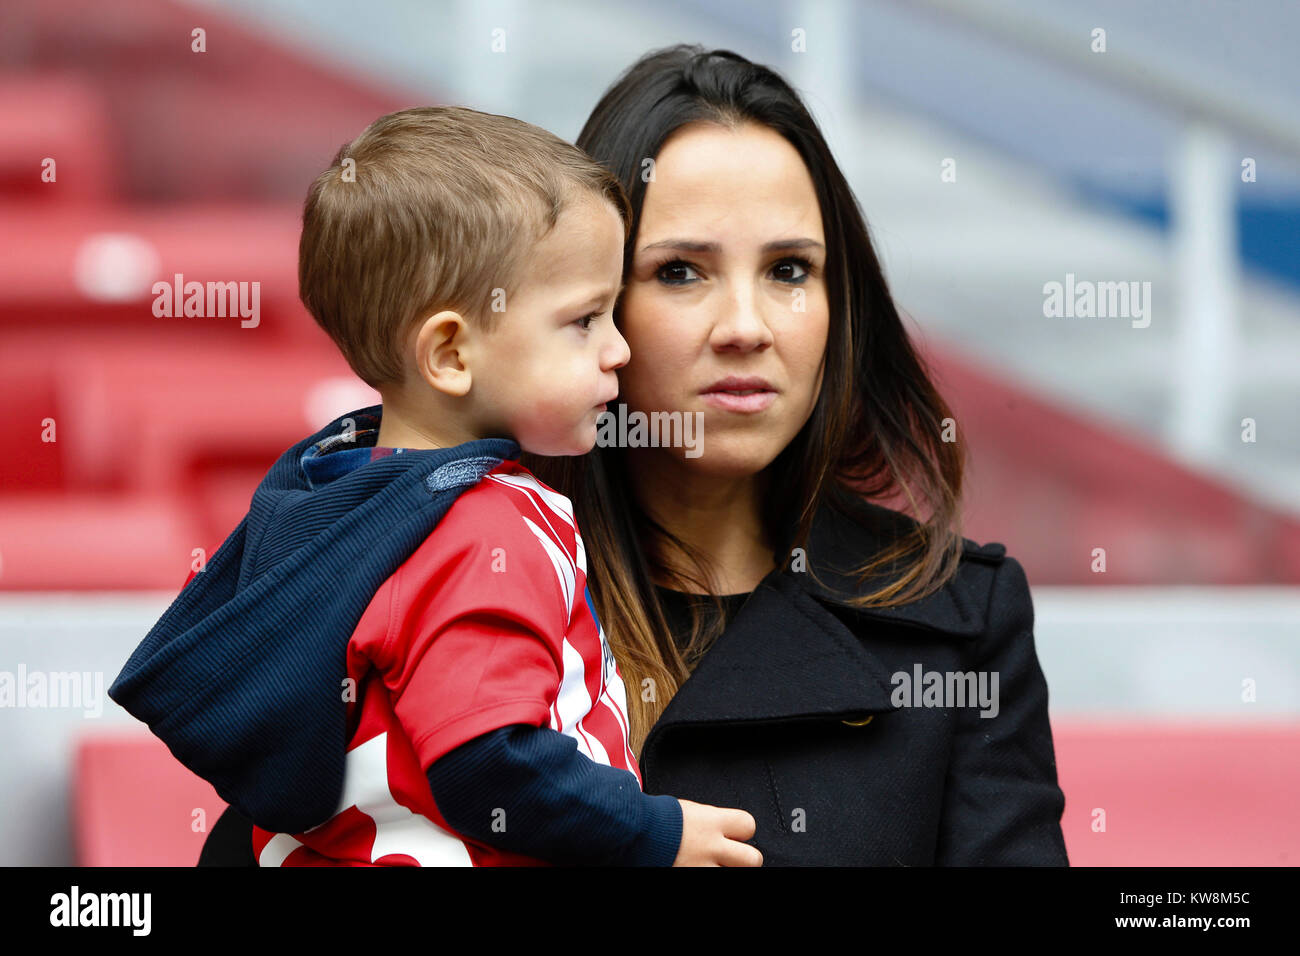 Madrid, Spain. 31st December, 2017. The family of Vitolo during his presentation as a new player of Atletico de Madrid at the Wanda Metropolitano stadium in Madrid, Spain, December 31, 2017 . Credit: Gtres Información más Comuniación on line, S.L./Alamy Live News Stock Photo